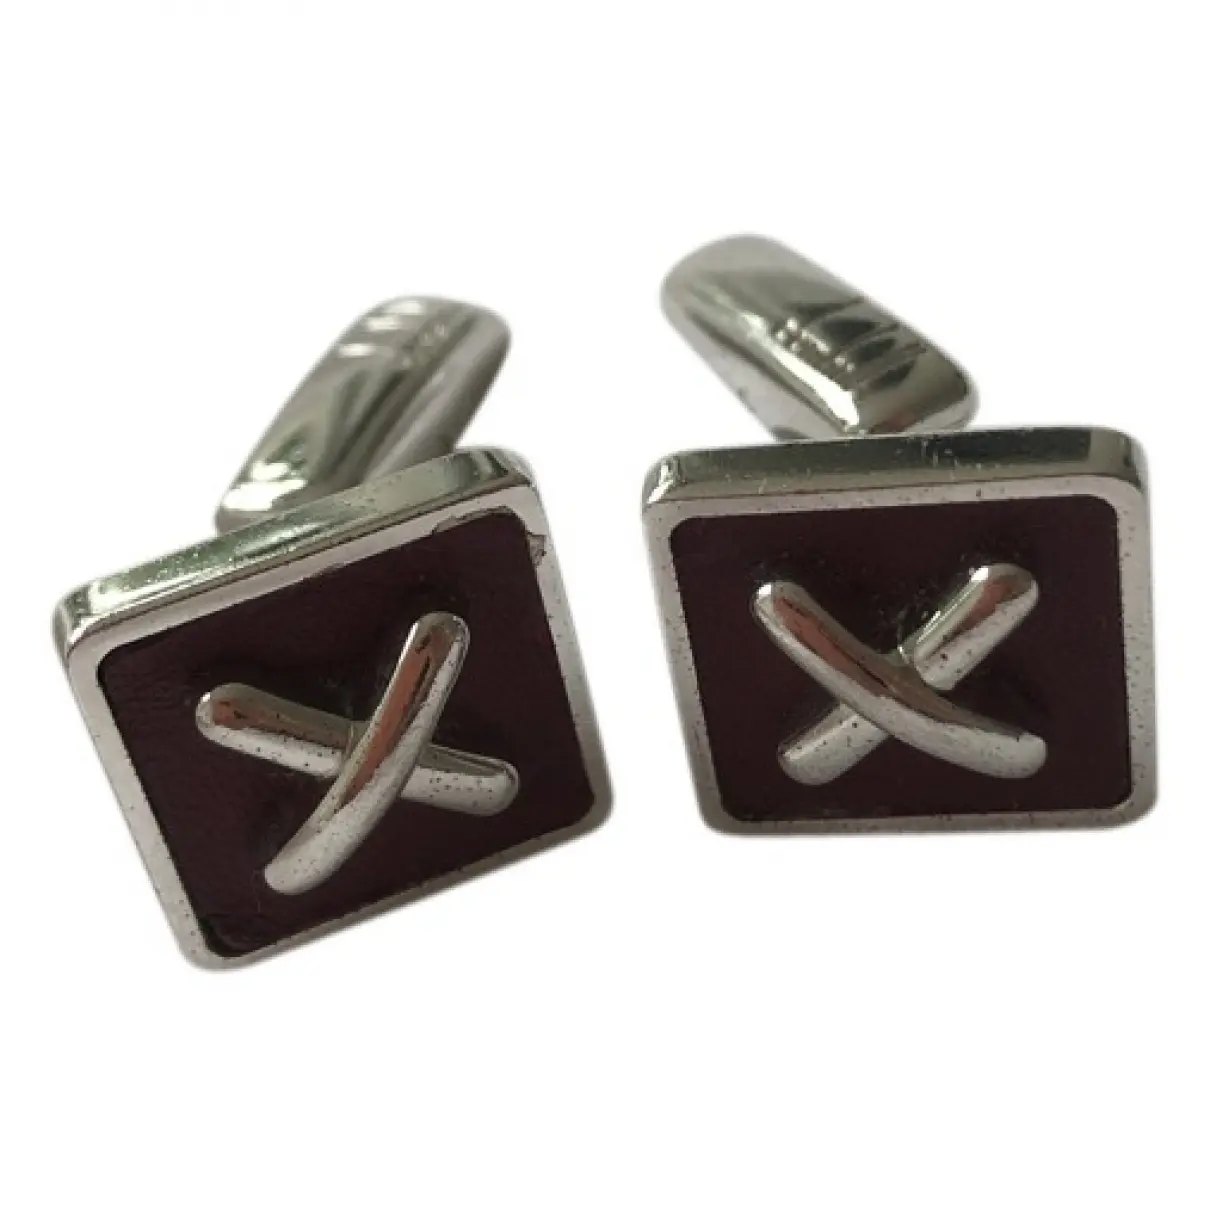 Silver cufflinks Alfred Dunhill - Vintage